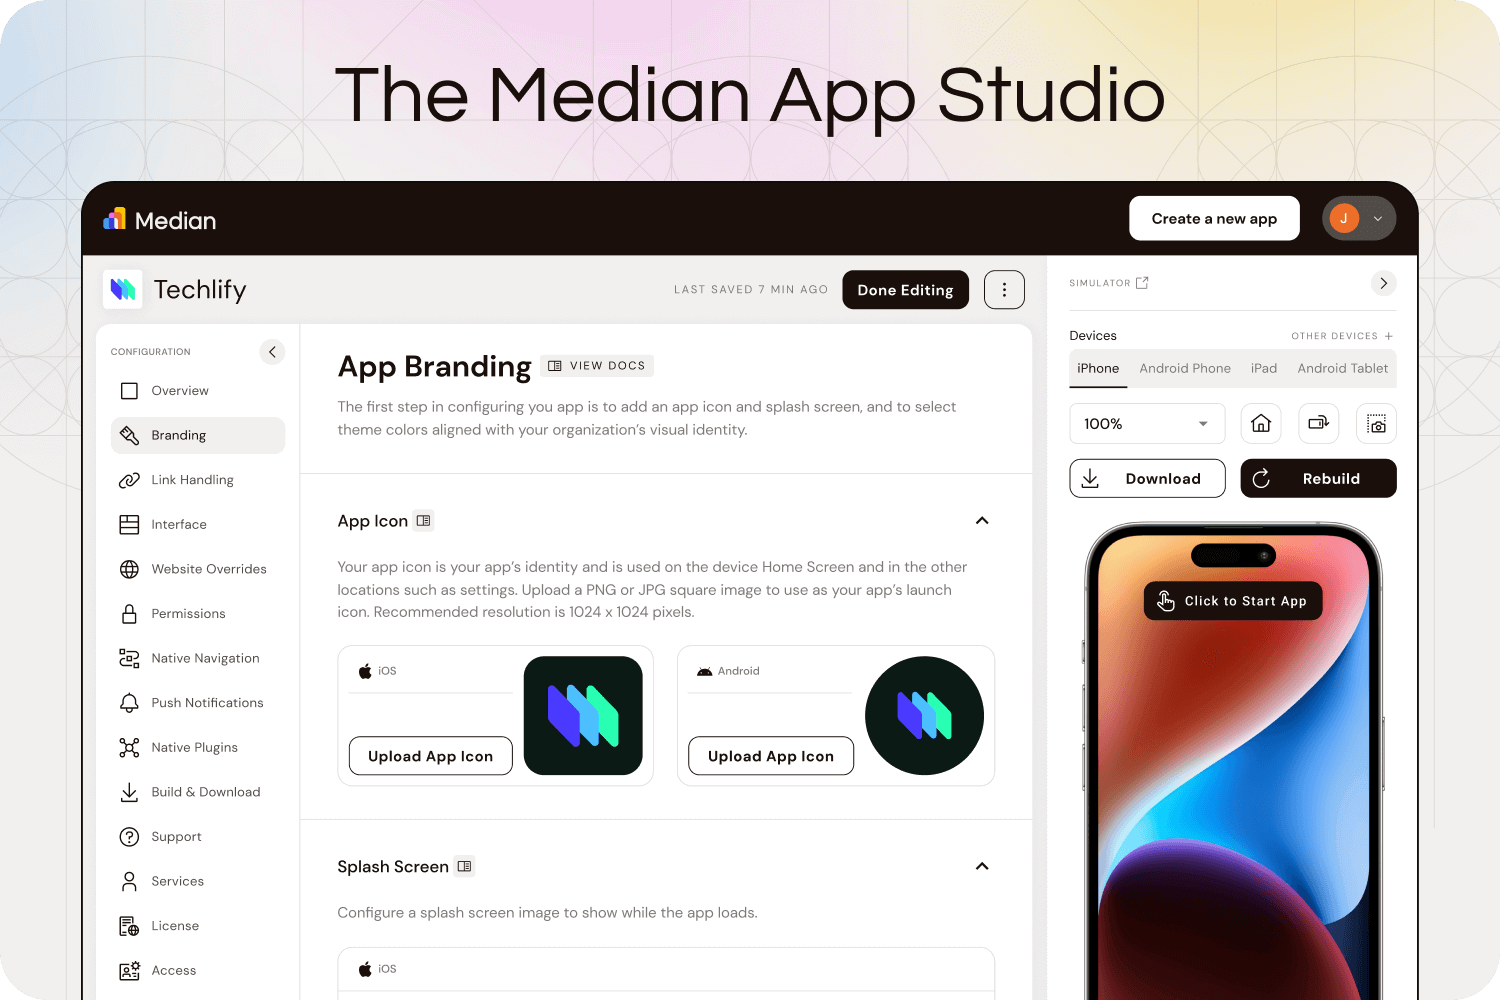 The Median App Studio showing how to instantly convert your app and customize it in the online app builder